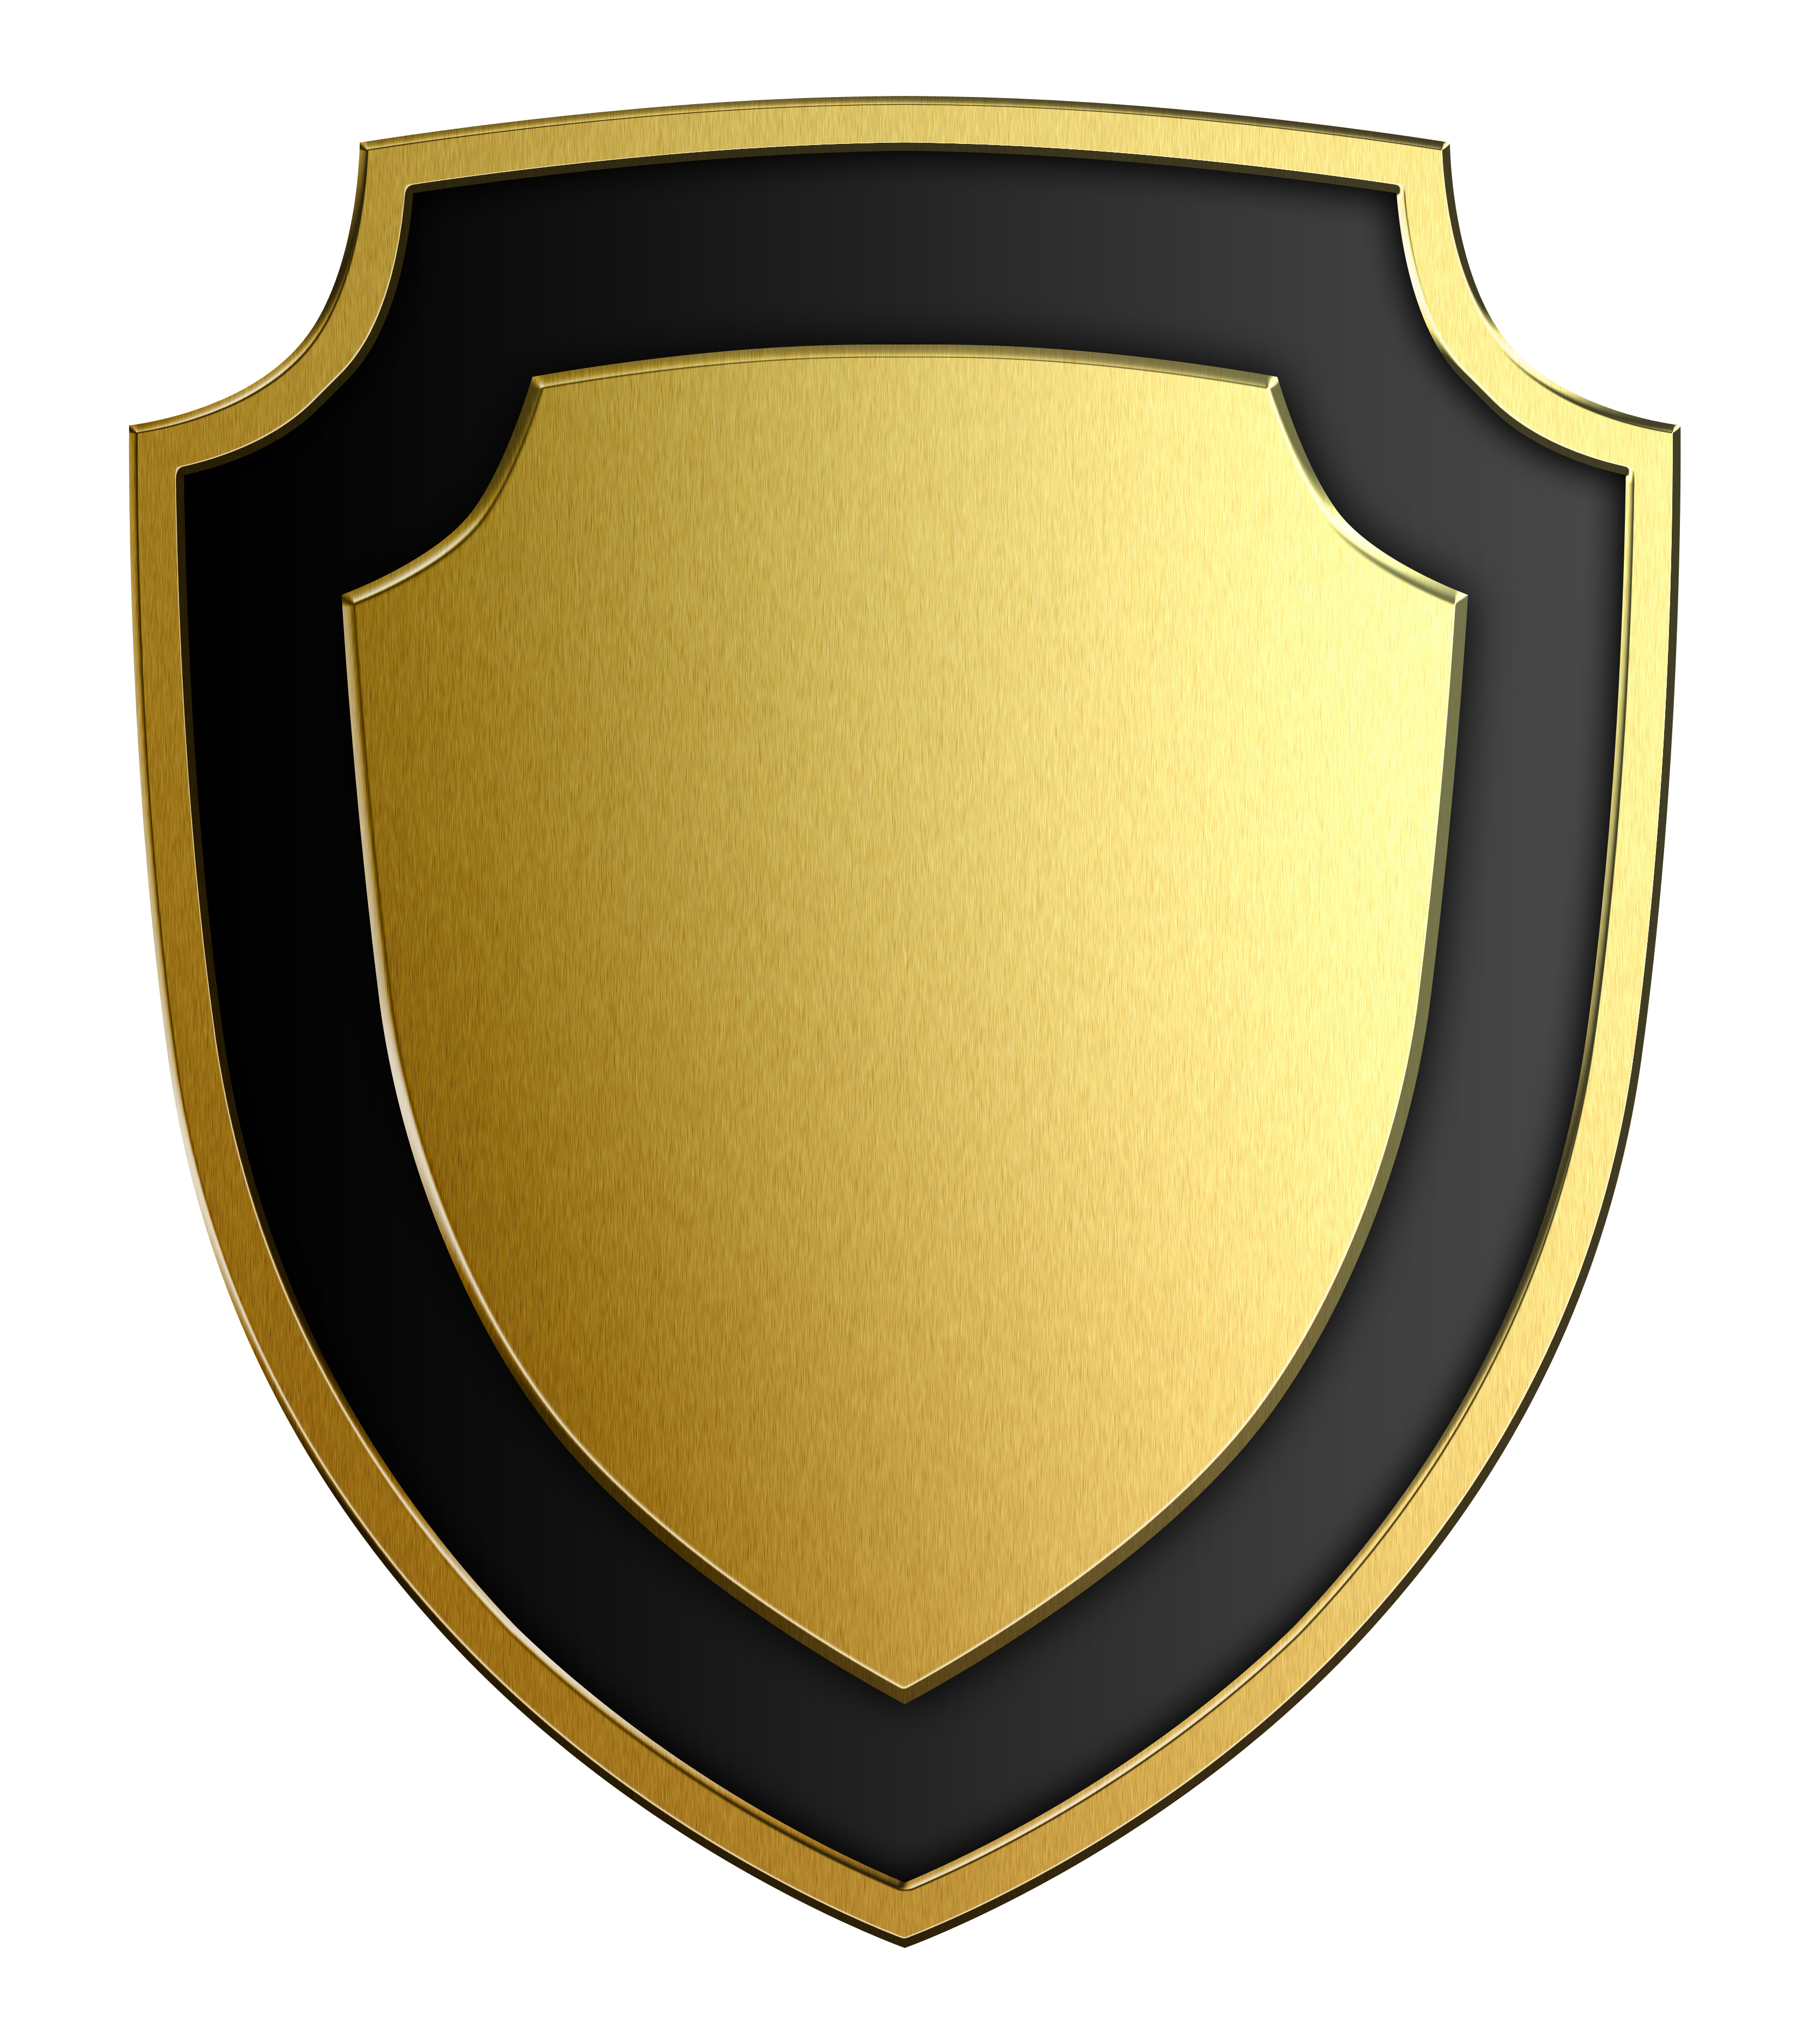 Free Security Shield Png Transparent Images Download Free Security Shield Png Transparent Images Png Images Free Cliparts On Clipart Library